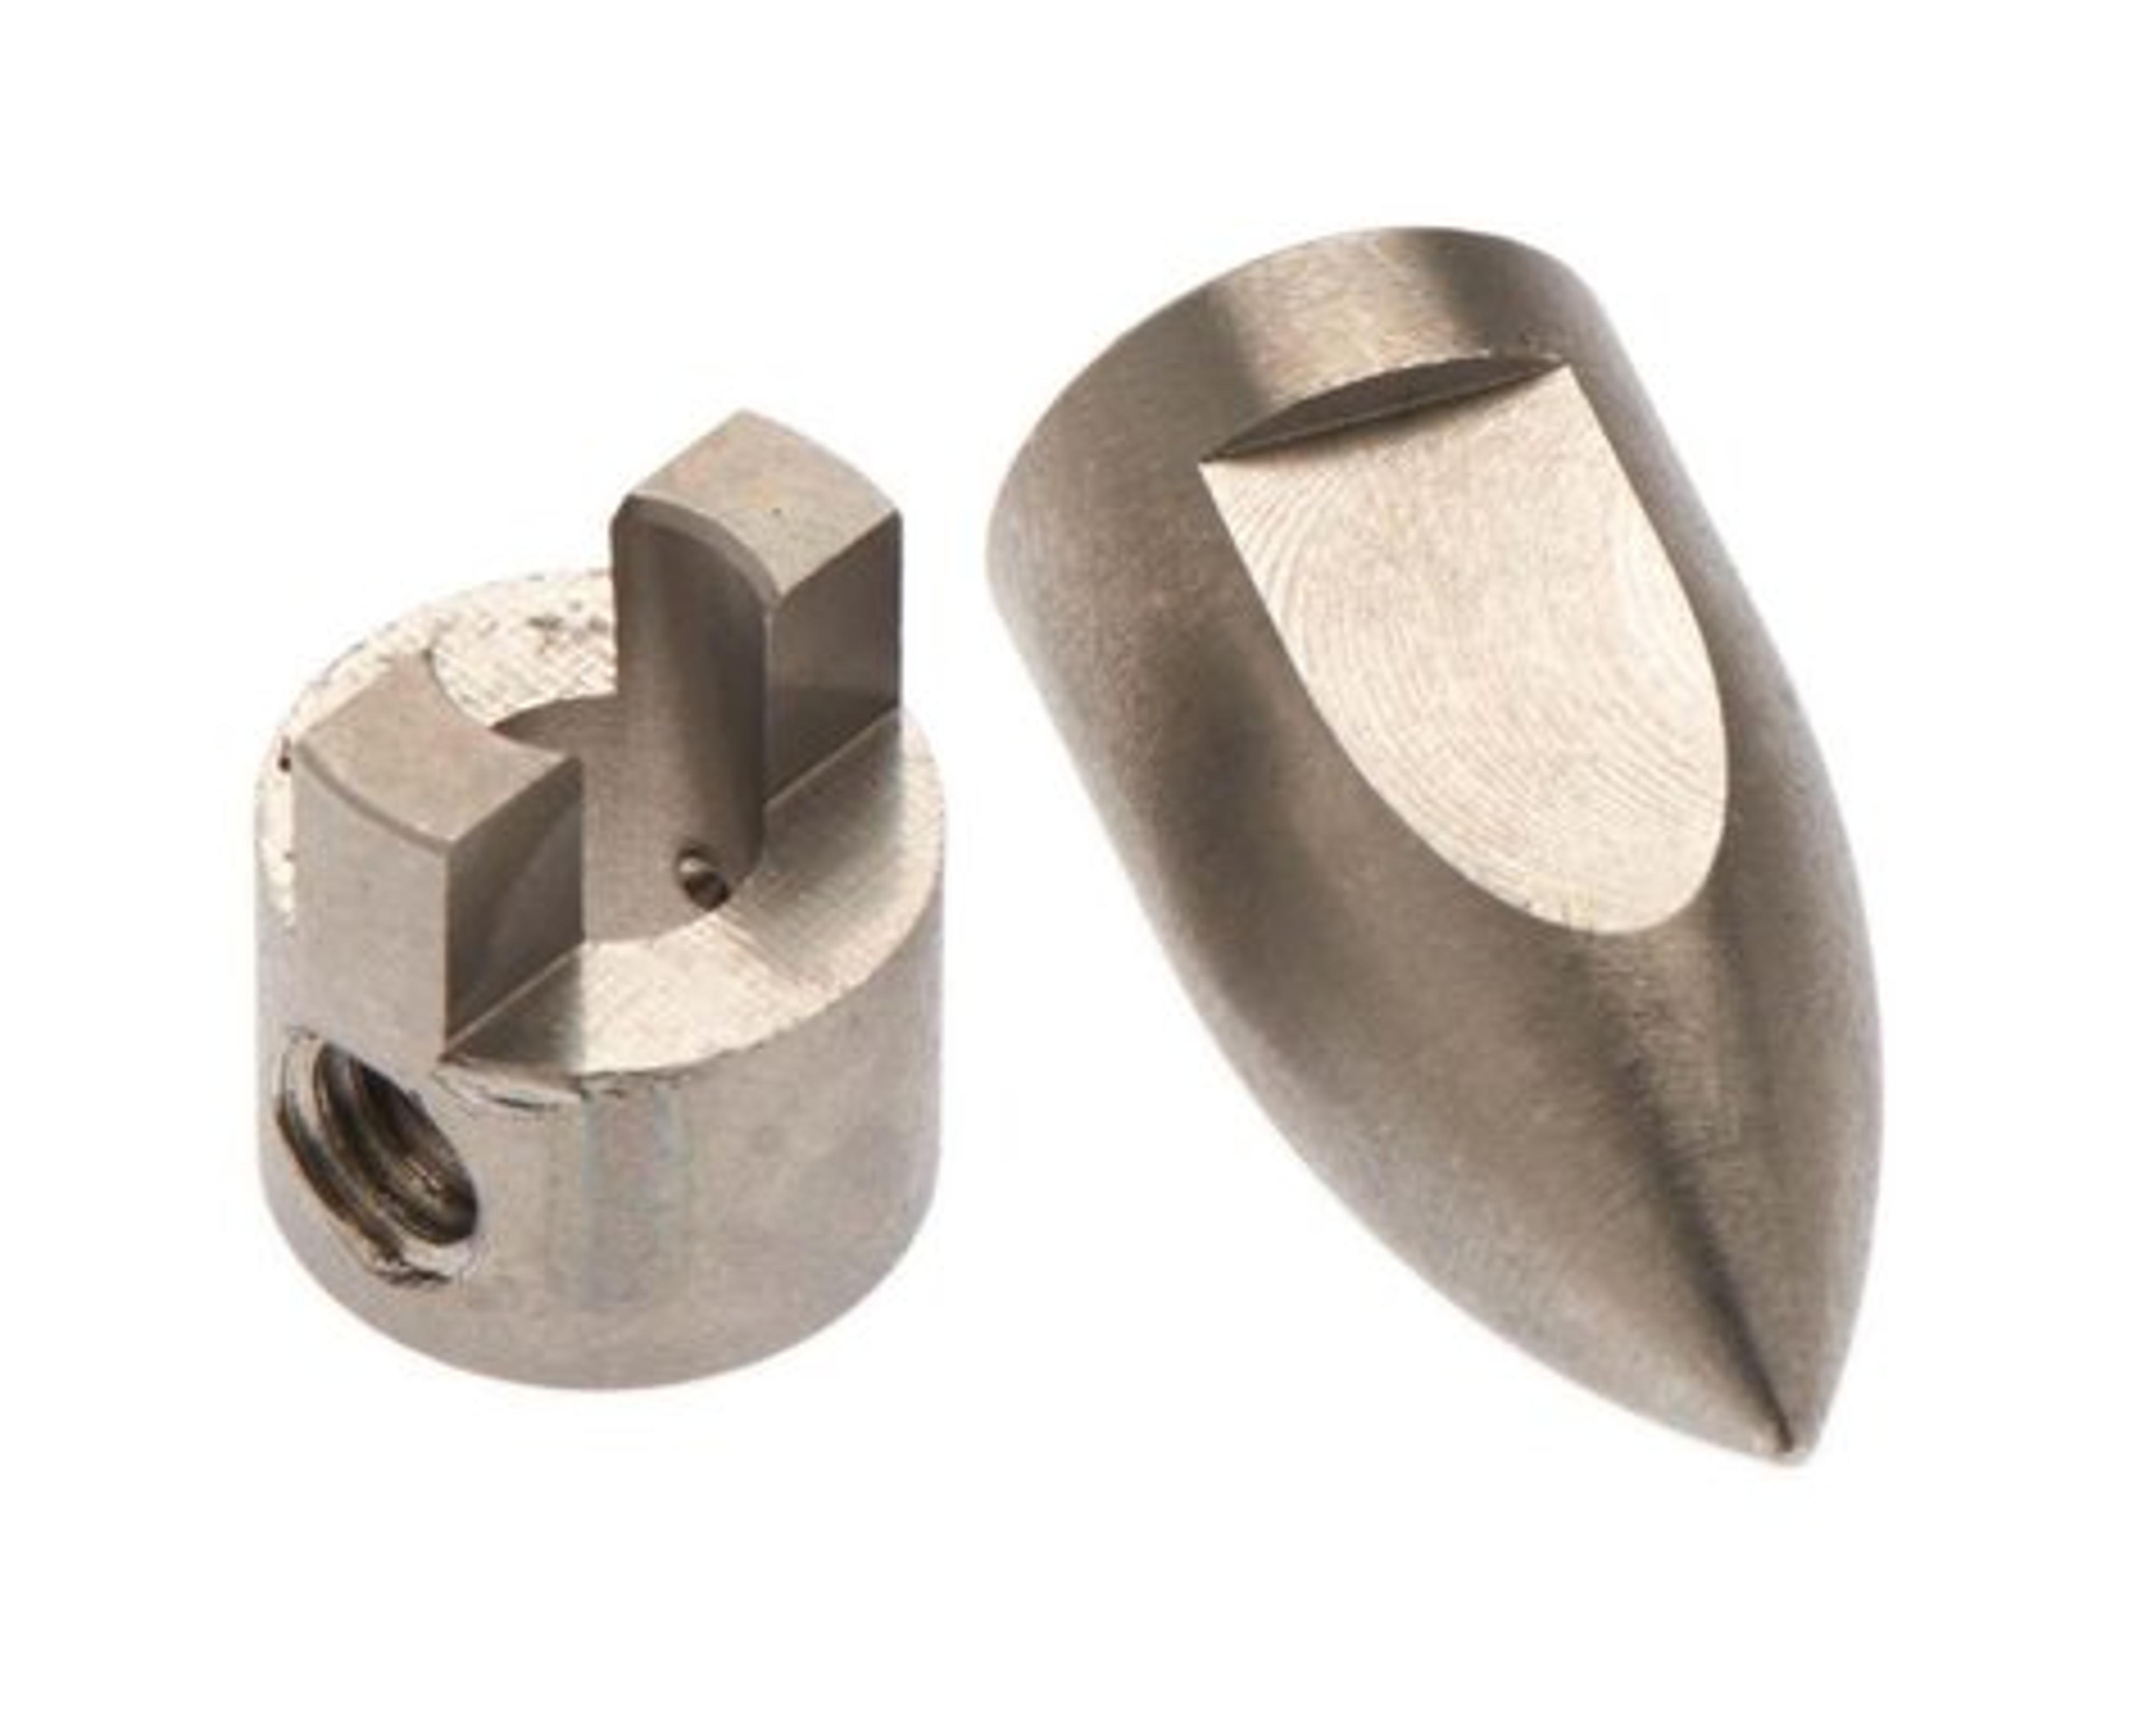 Conical Bullet M4 Propeller Nut and Drive Dog (Spartan)